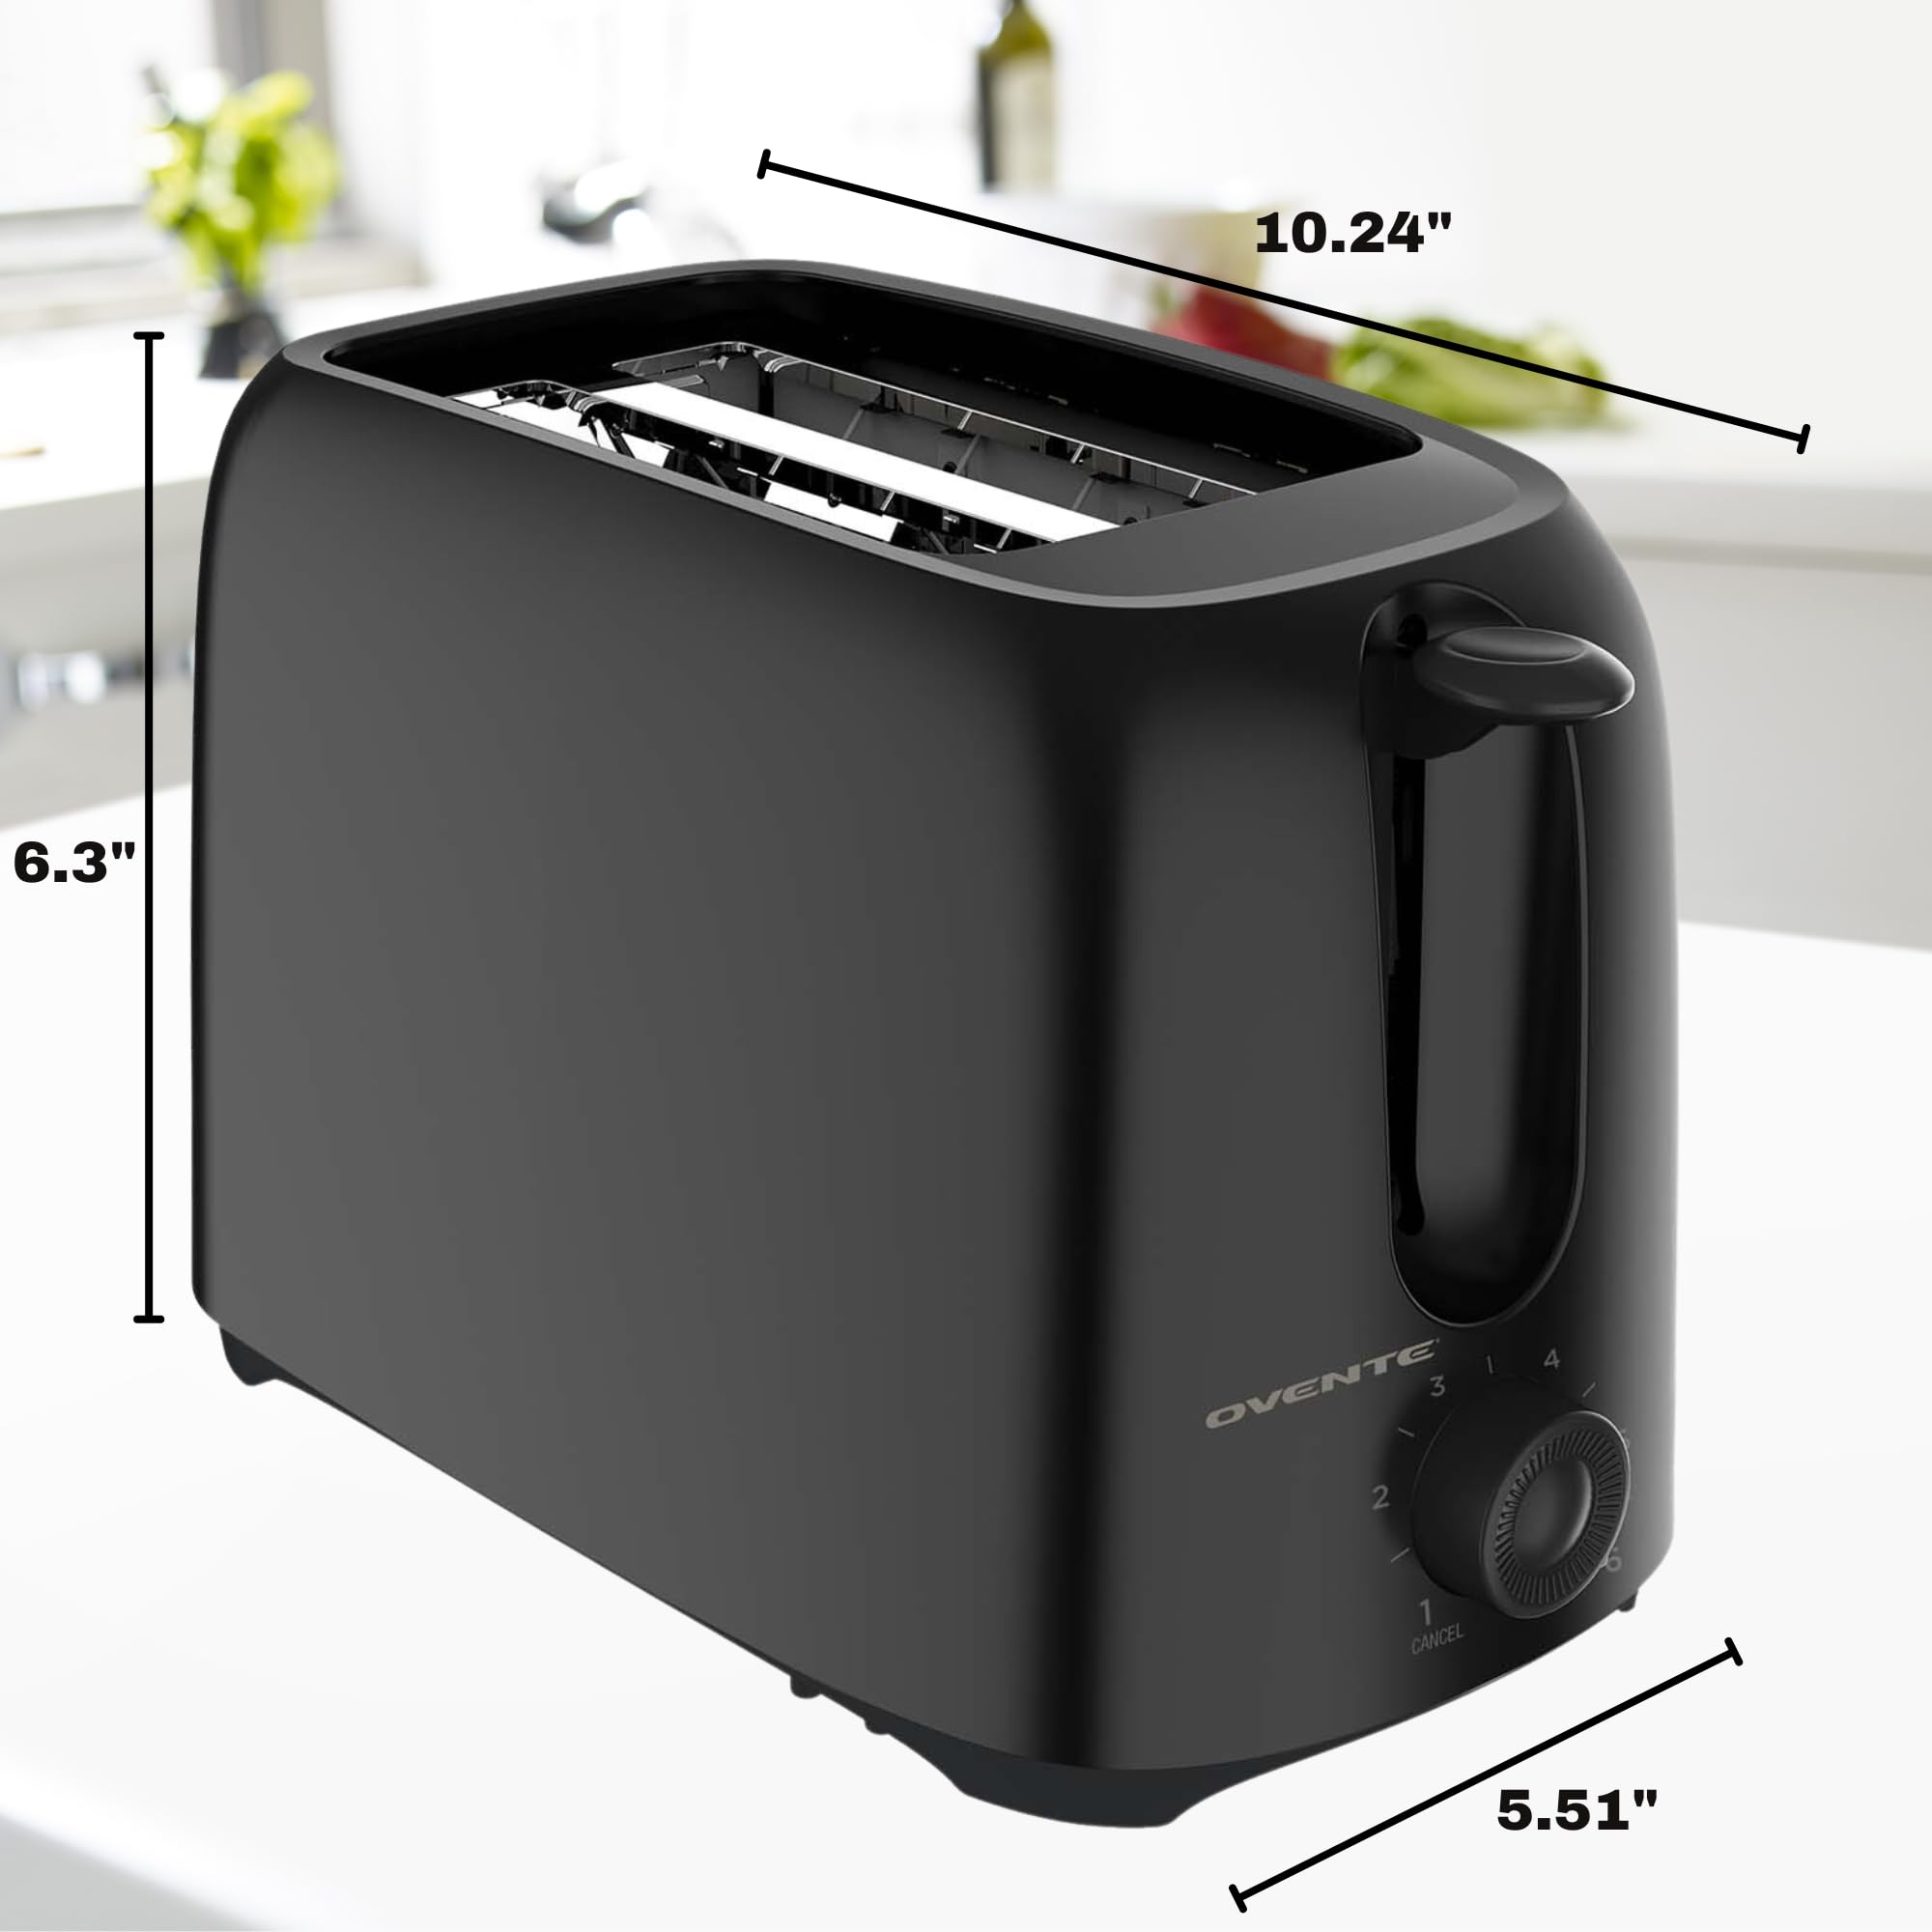 OVENTE Electric 2 Slice Toaster Machine with 6-Shade Toast Settings, 700W Power, Removable Crumb Tray and Compact Design Perfect for Toasting Bread, Bagels, Waffles and Puff Pastry, Black TP2210B